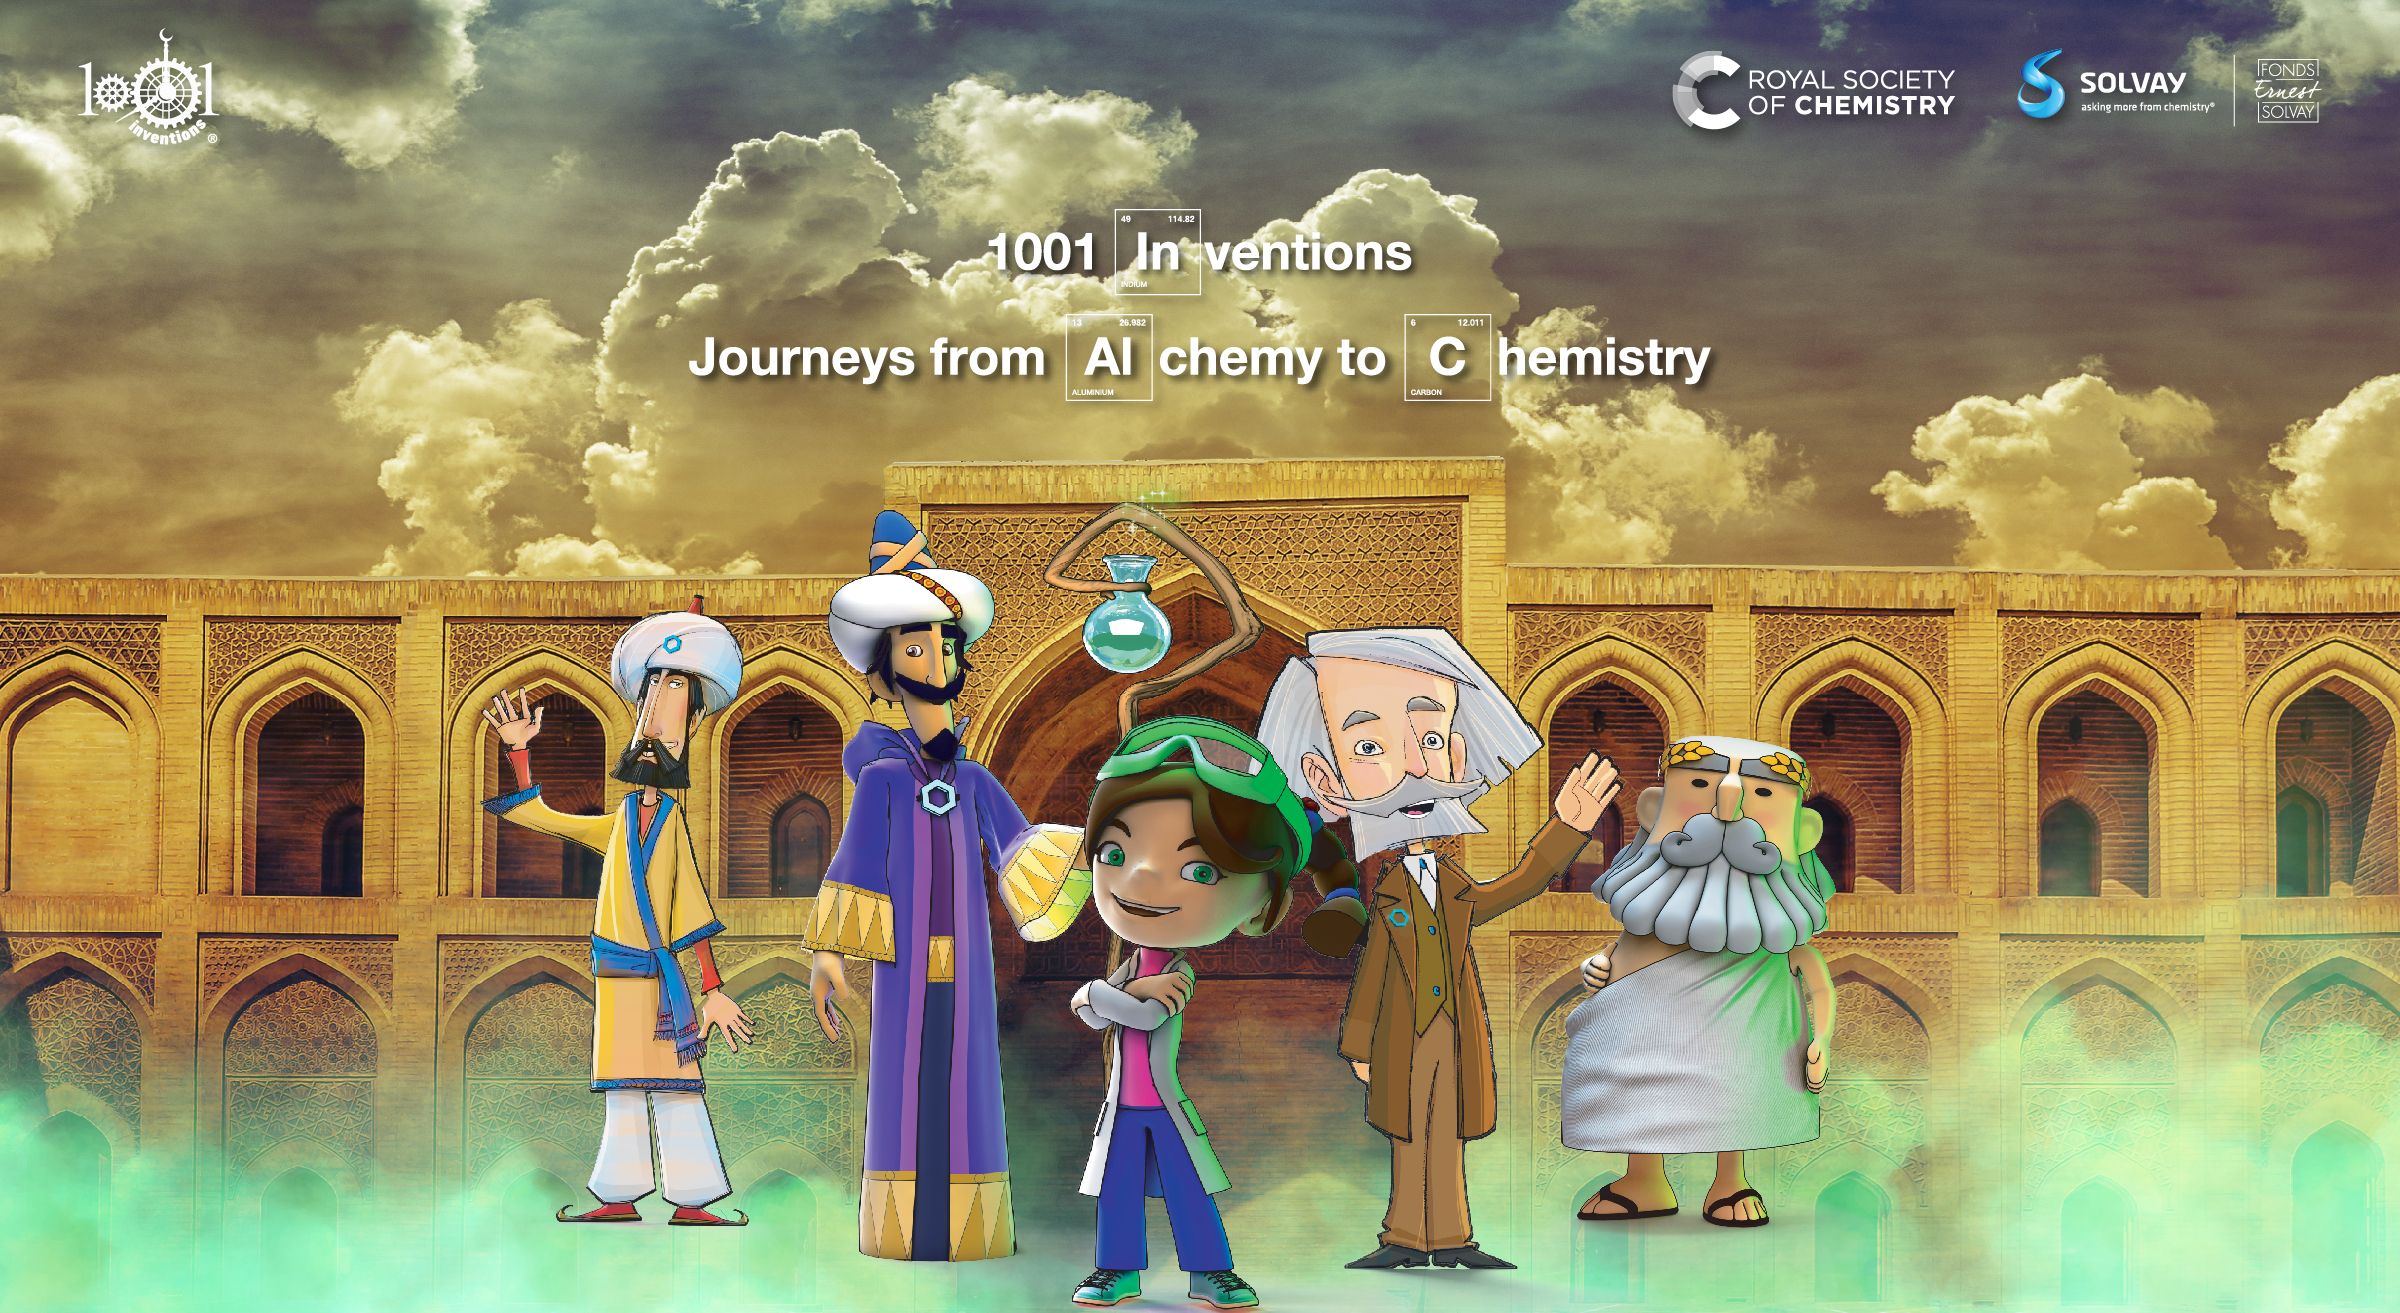 1001 Inventions: Journeys from Alchemy to Chemistry